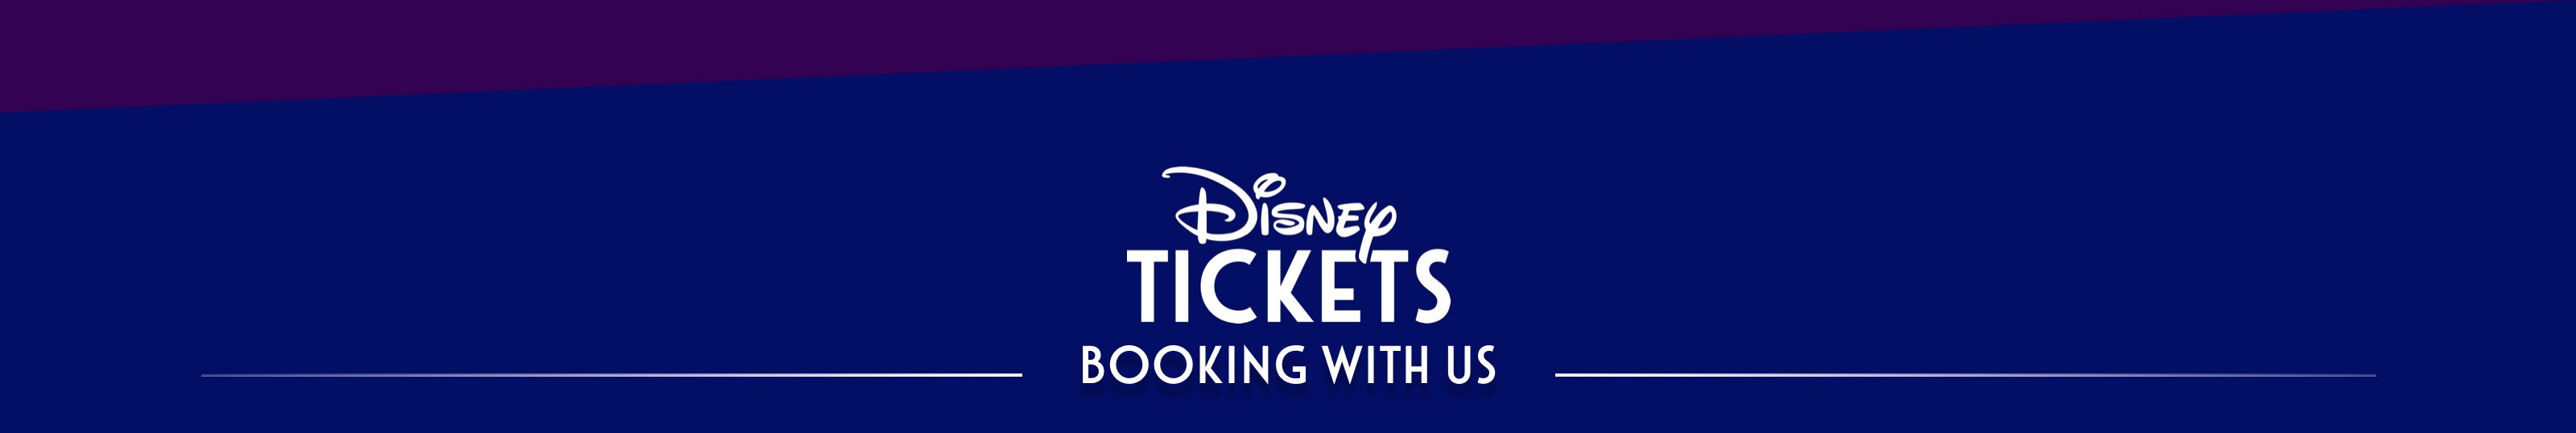 Logo of 'Disney Tickets - Booking With Us' featured on a blue background